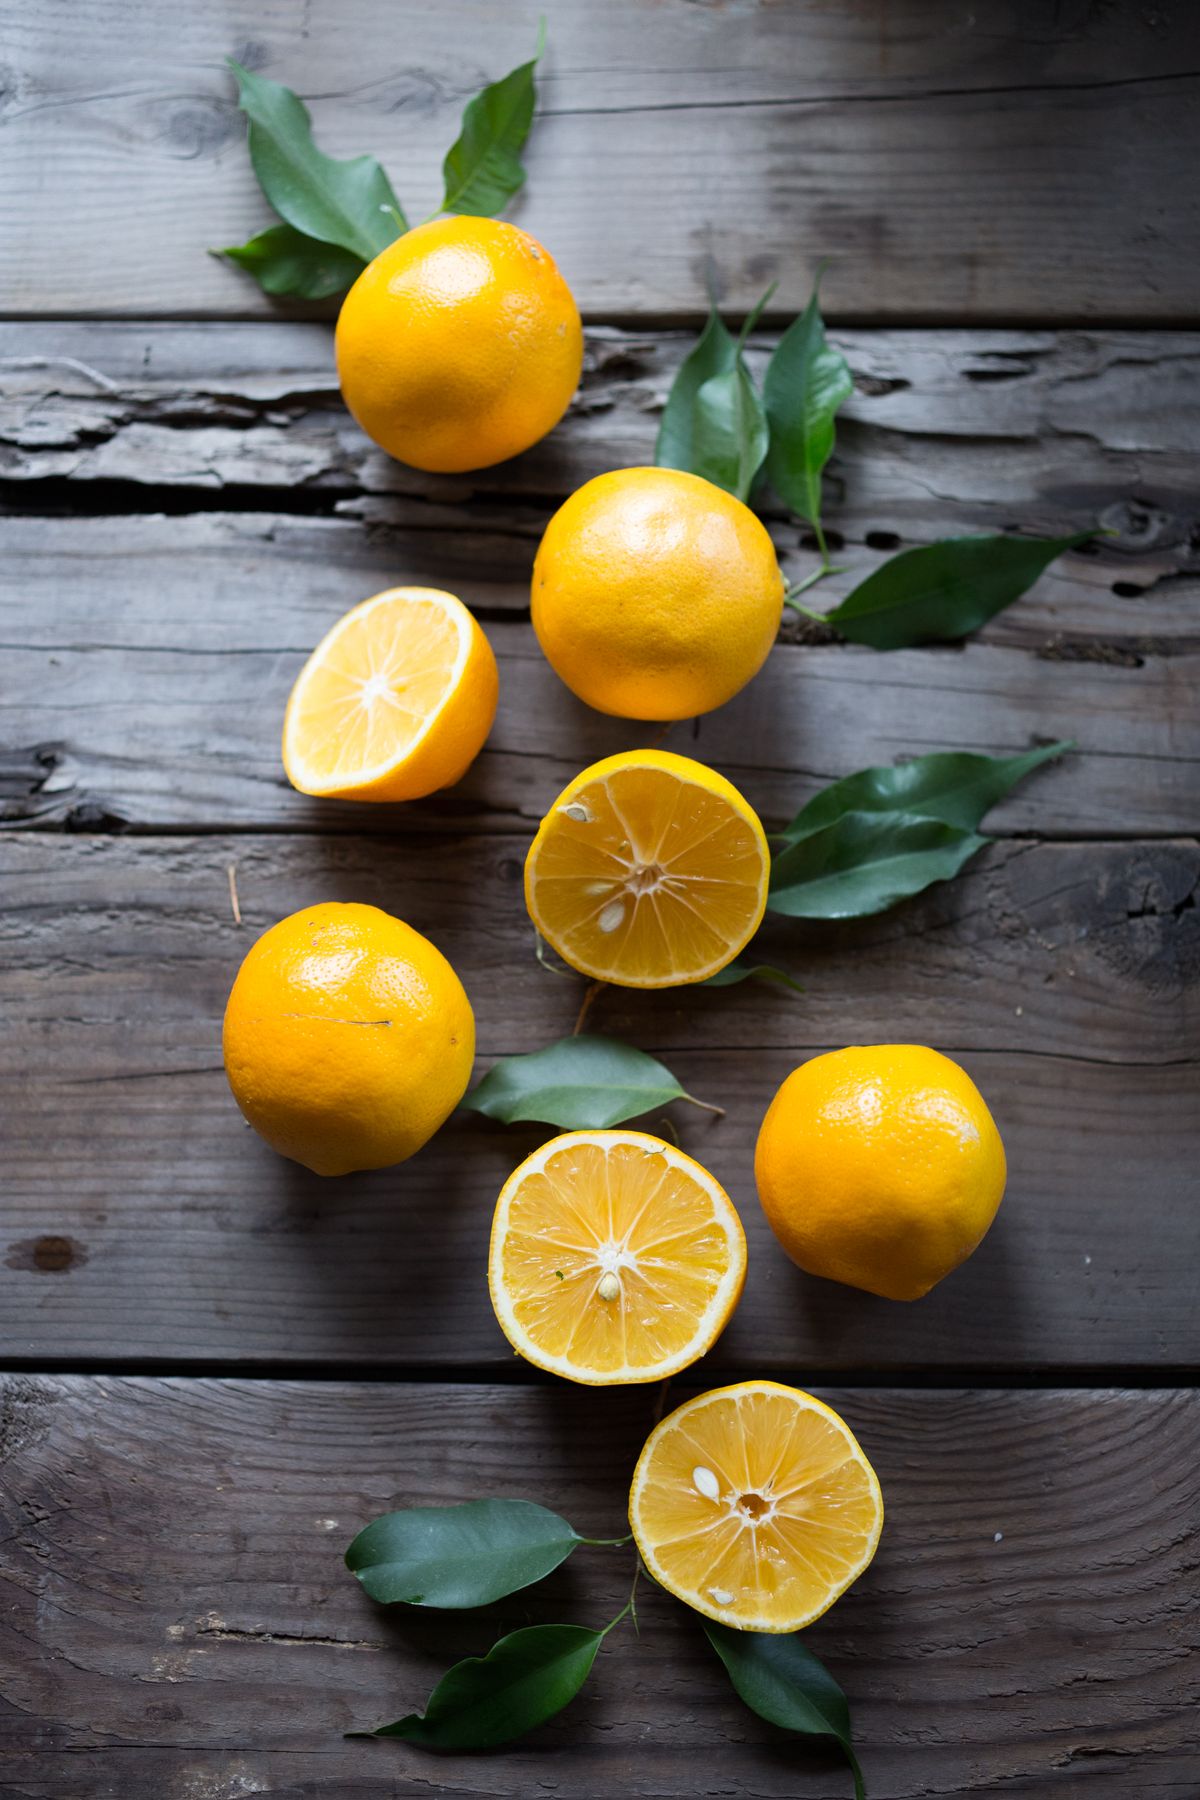 Meyer lemons make light and bright but not super acidic additions to both sweet and savory dishes. (Sylvia Fountaine)